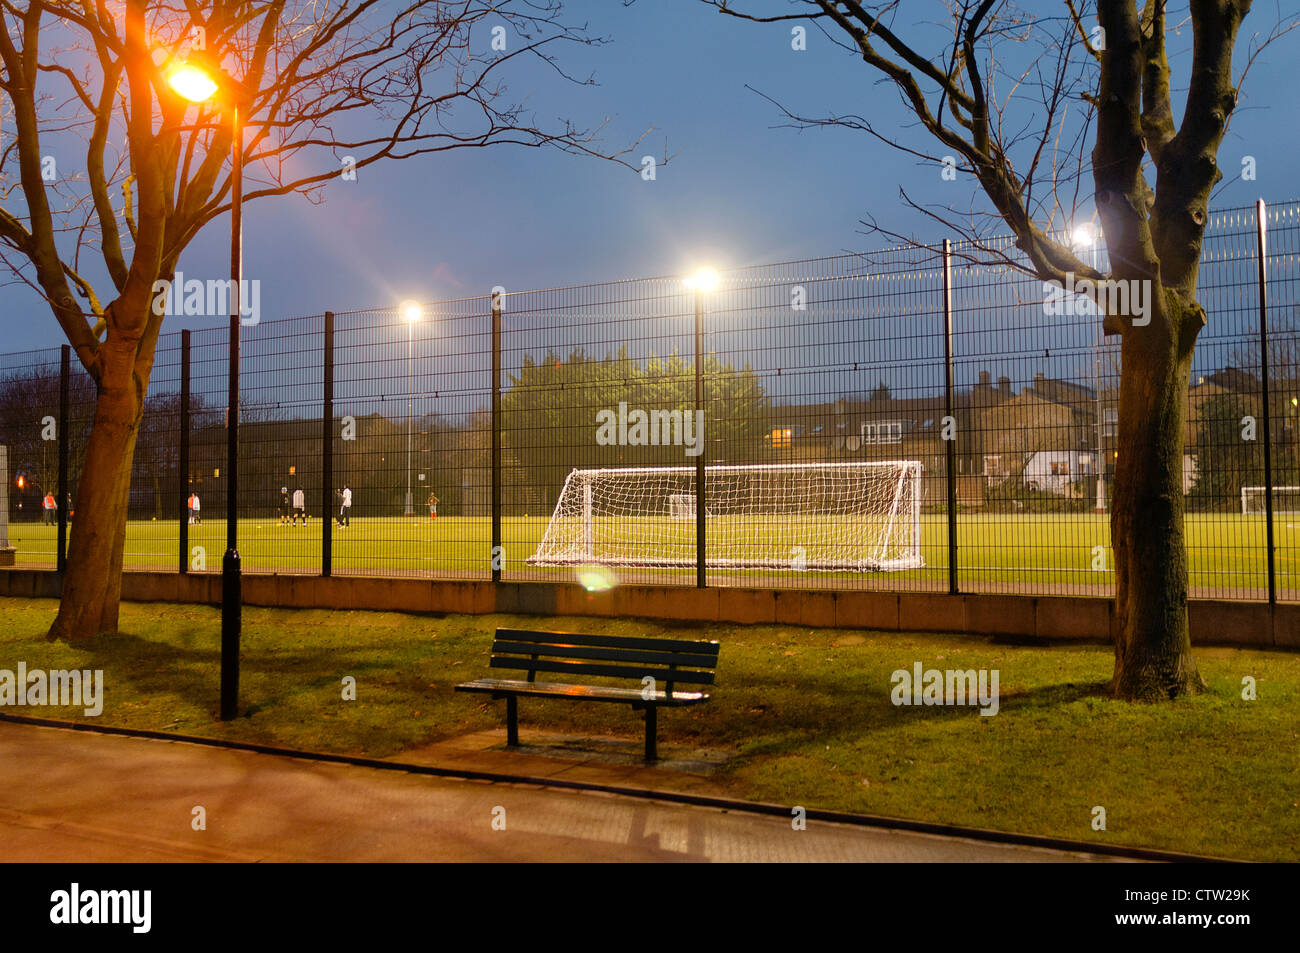 Evening atmospheric view of a playing-field in Whittington Park, Upper Holloway. Stock Photo